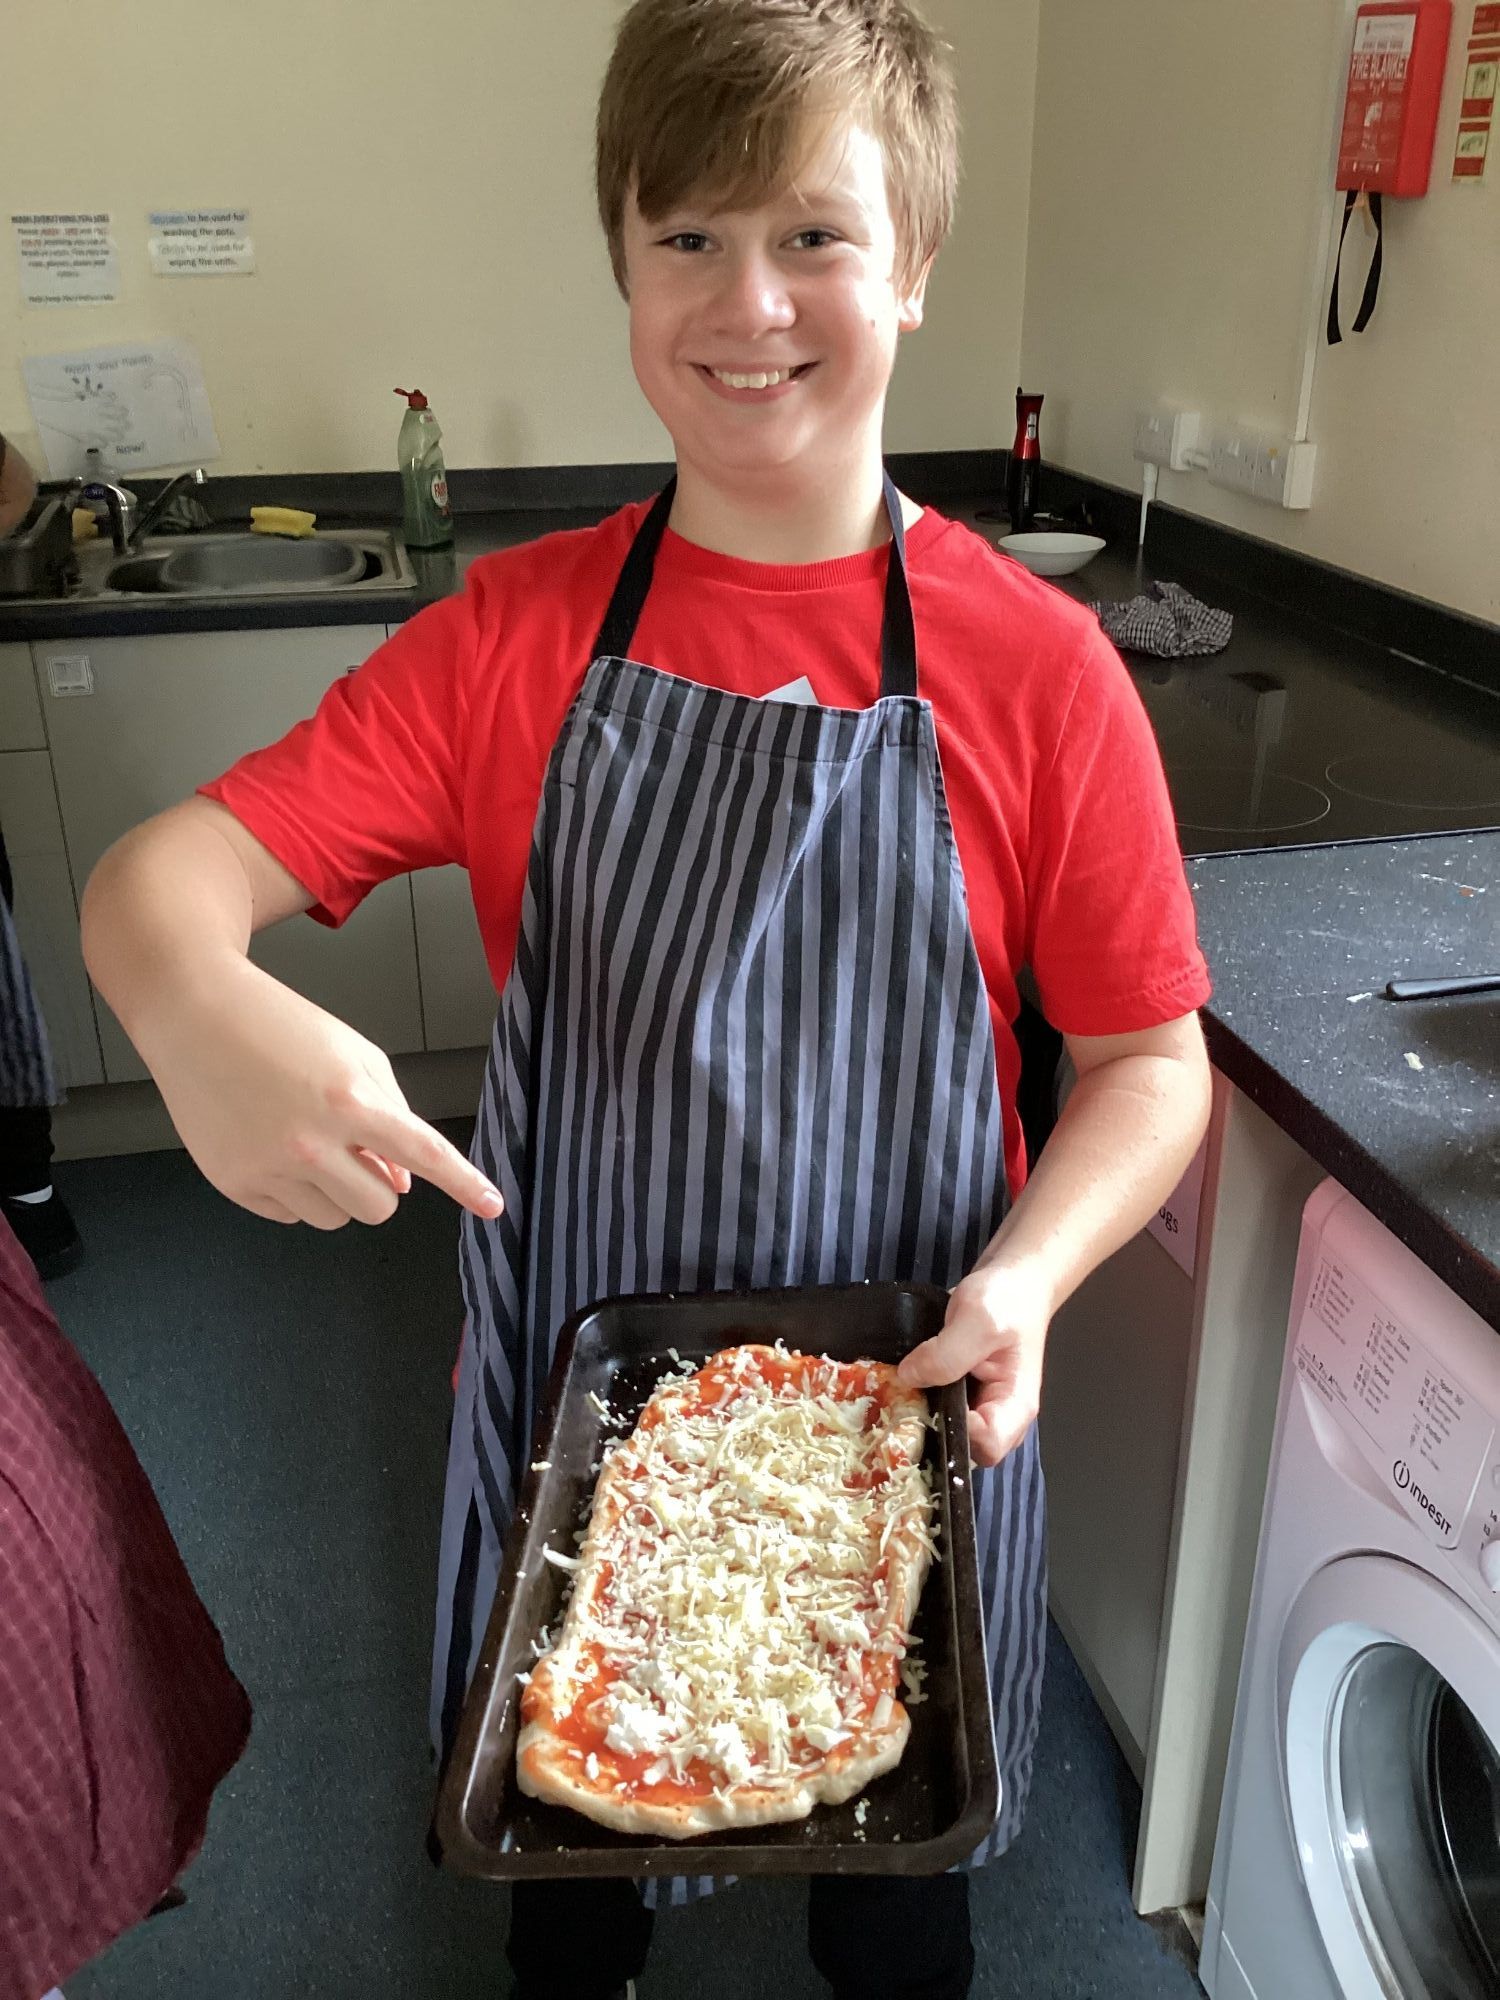 Boy in a red t-shirt and stripy apron pointing at the pizza he has made